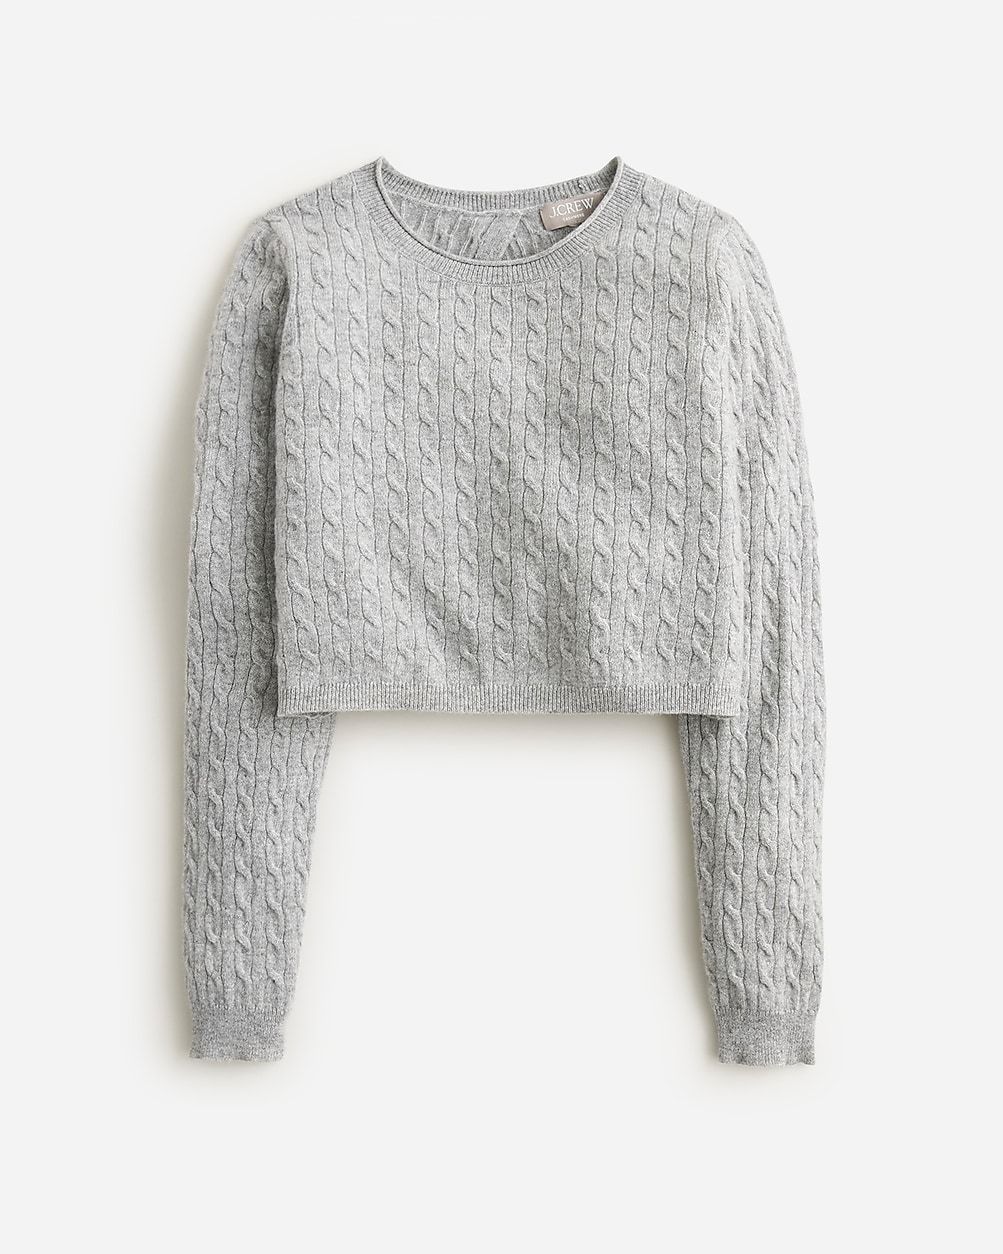 Extra 60% off sale styles with code SHOPSALE | J.Crew US